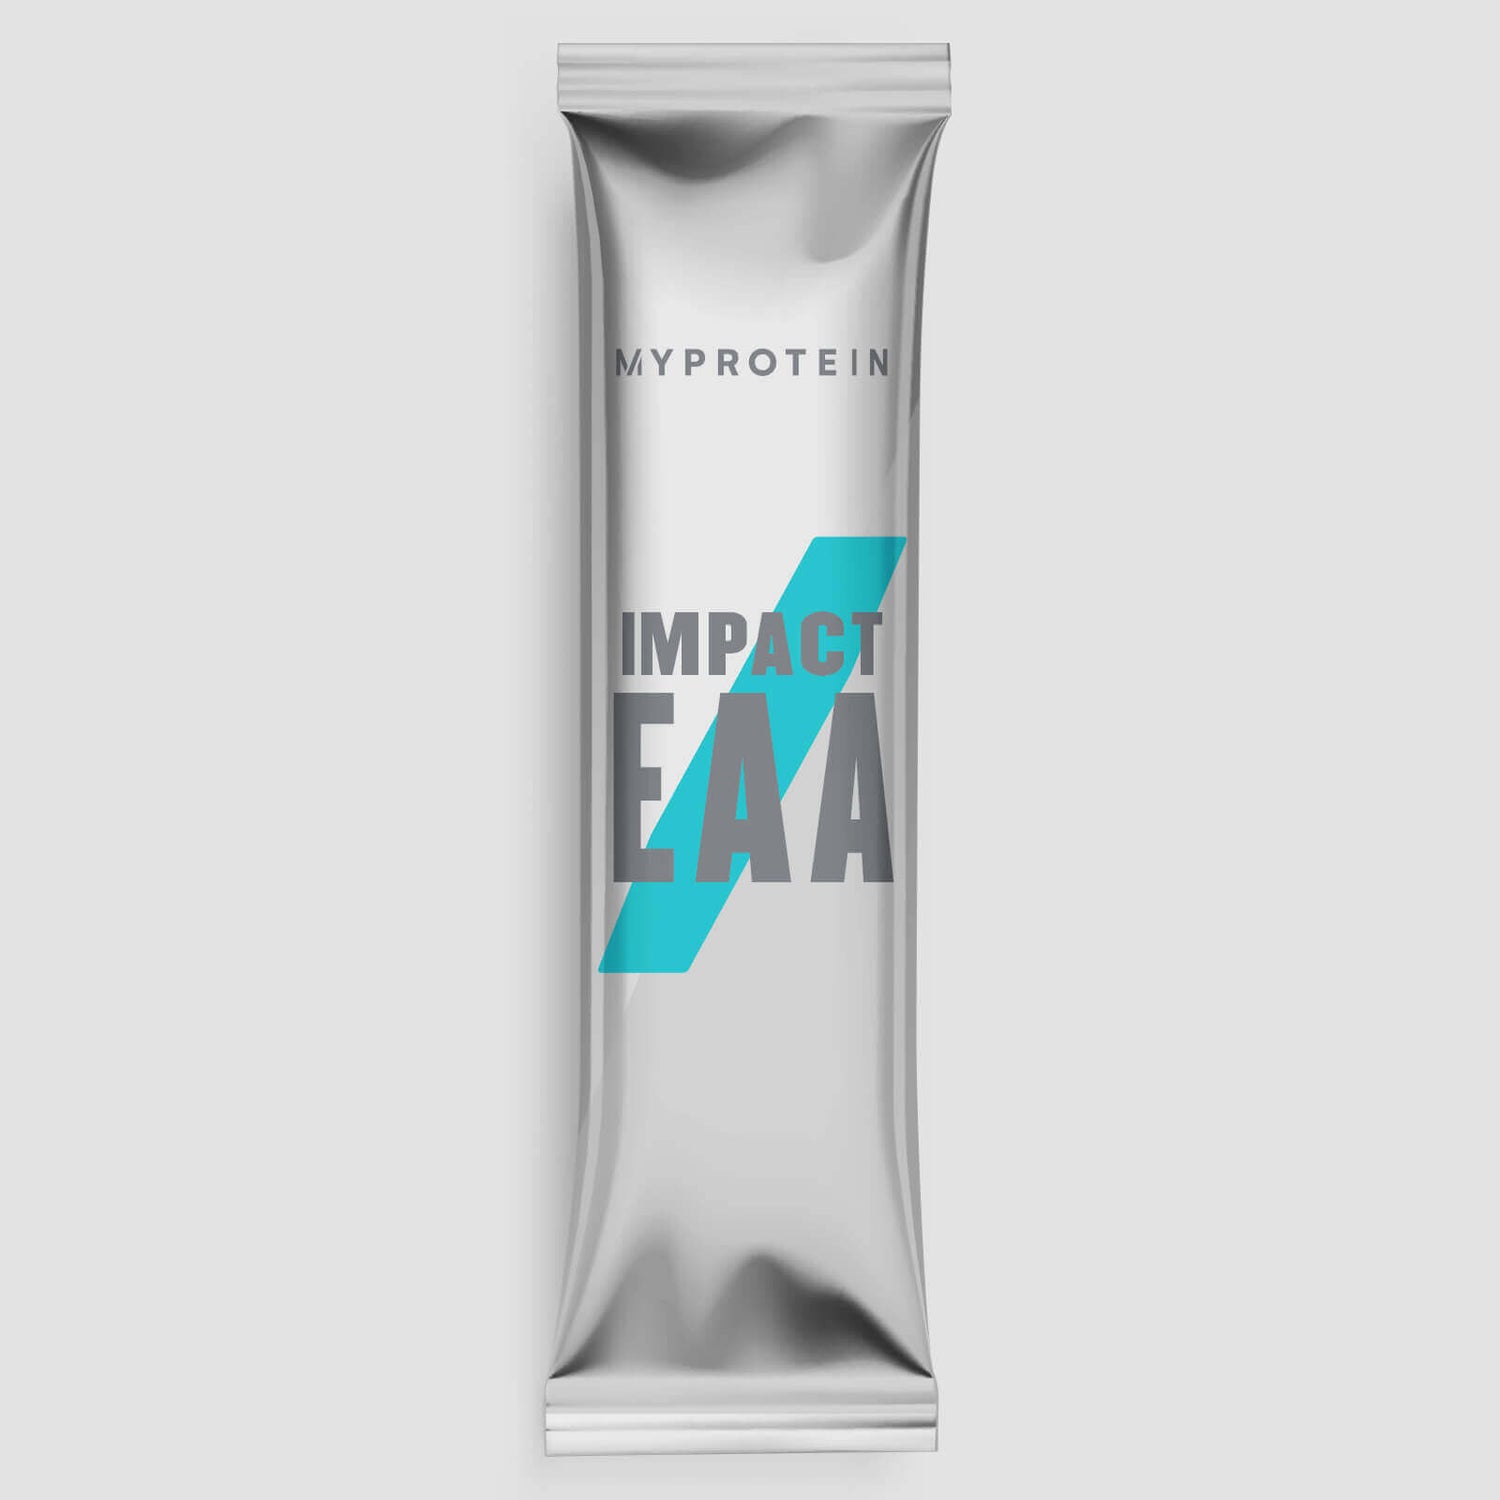 Myprotein Impact EAA Stick Pack (Sample) - 7g - Unflavoured